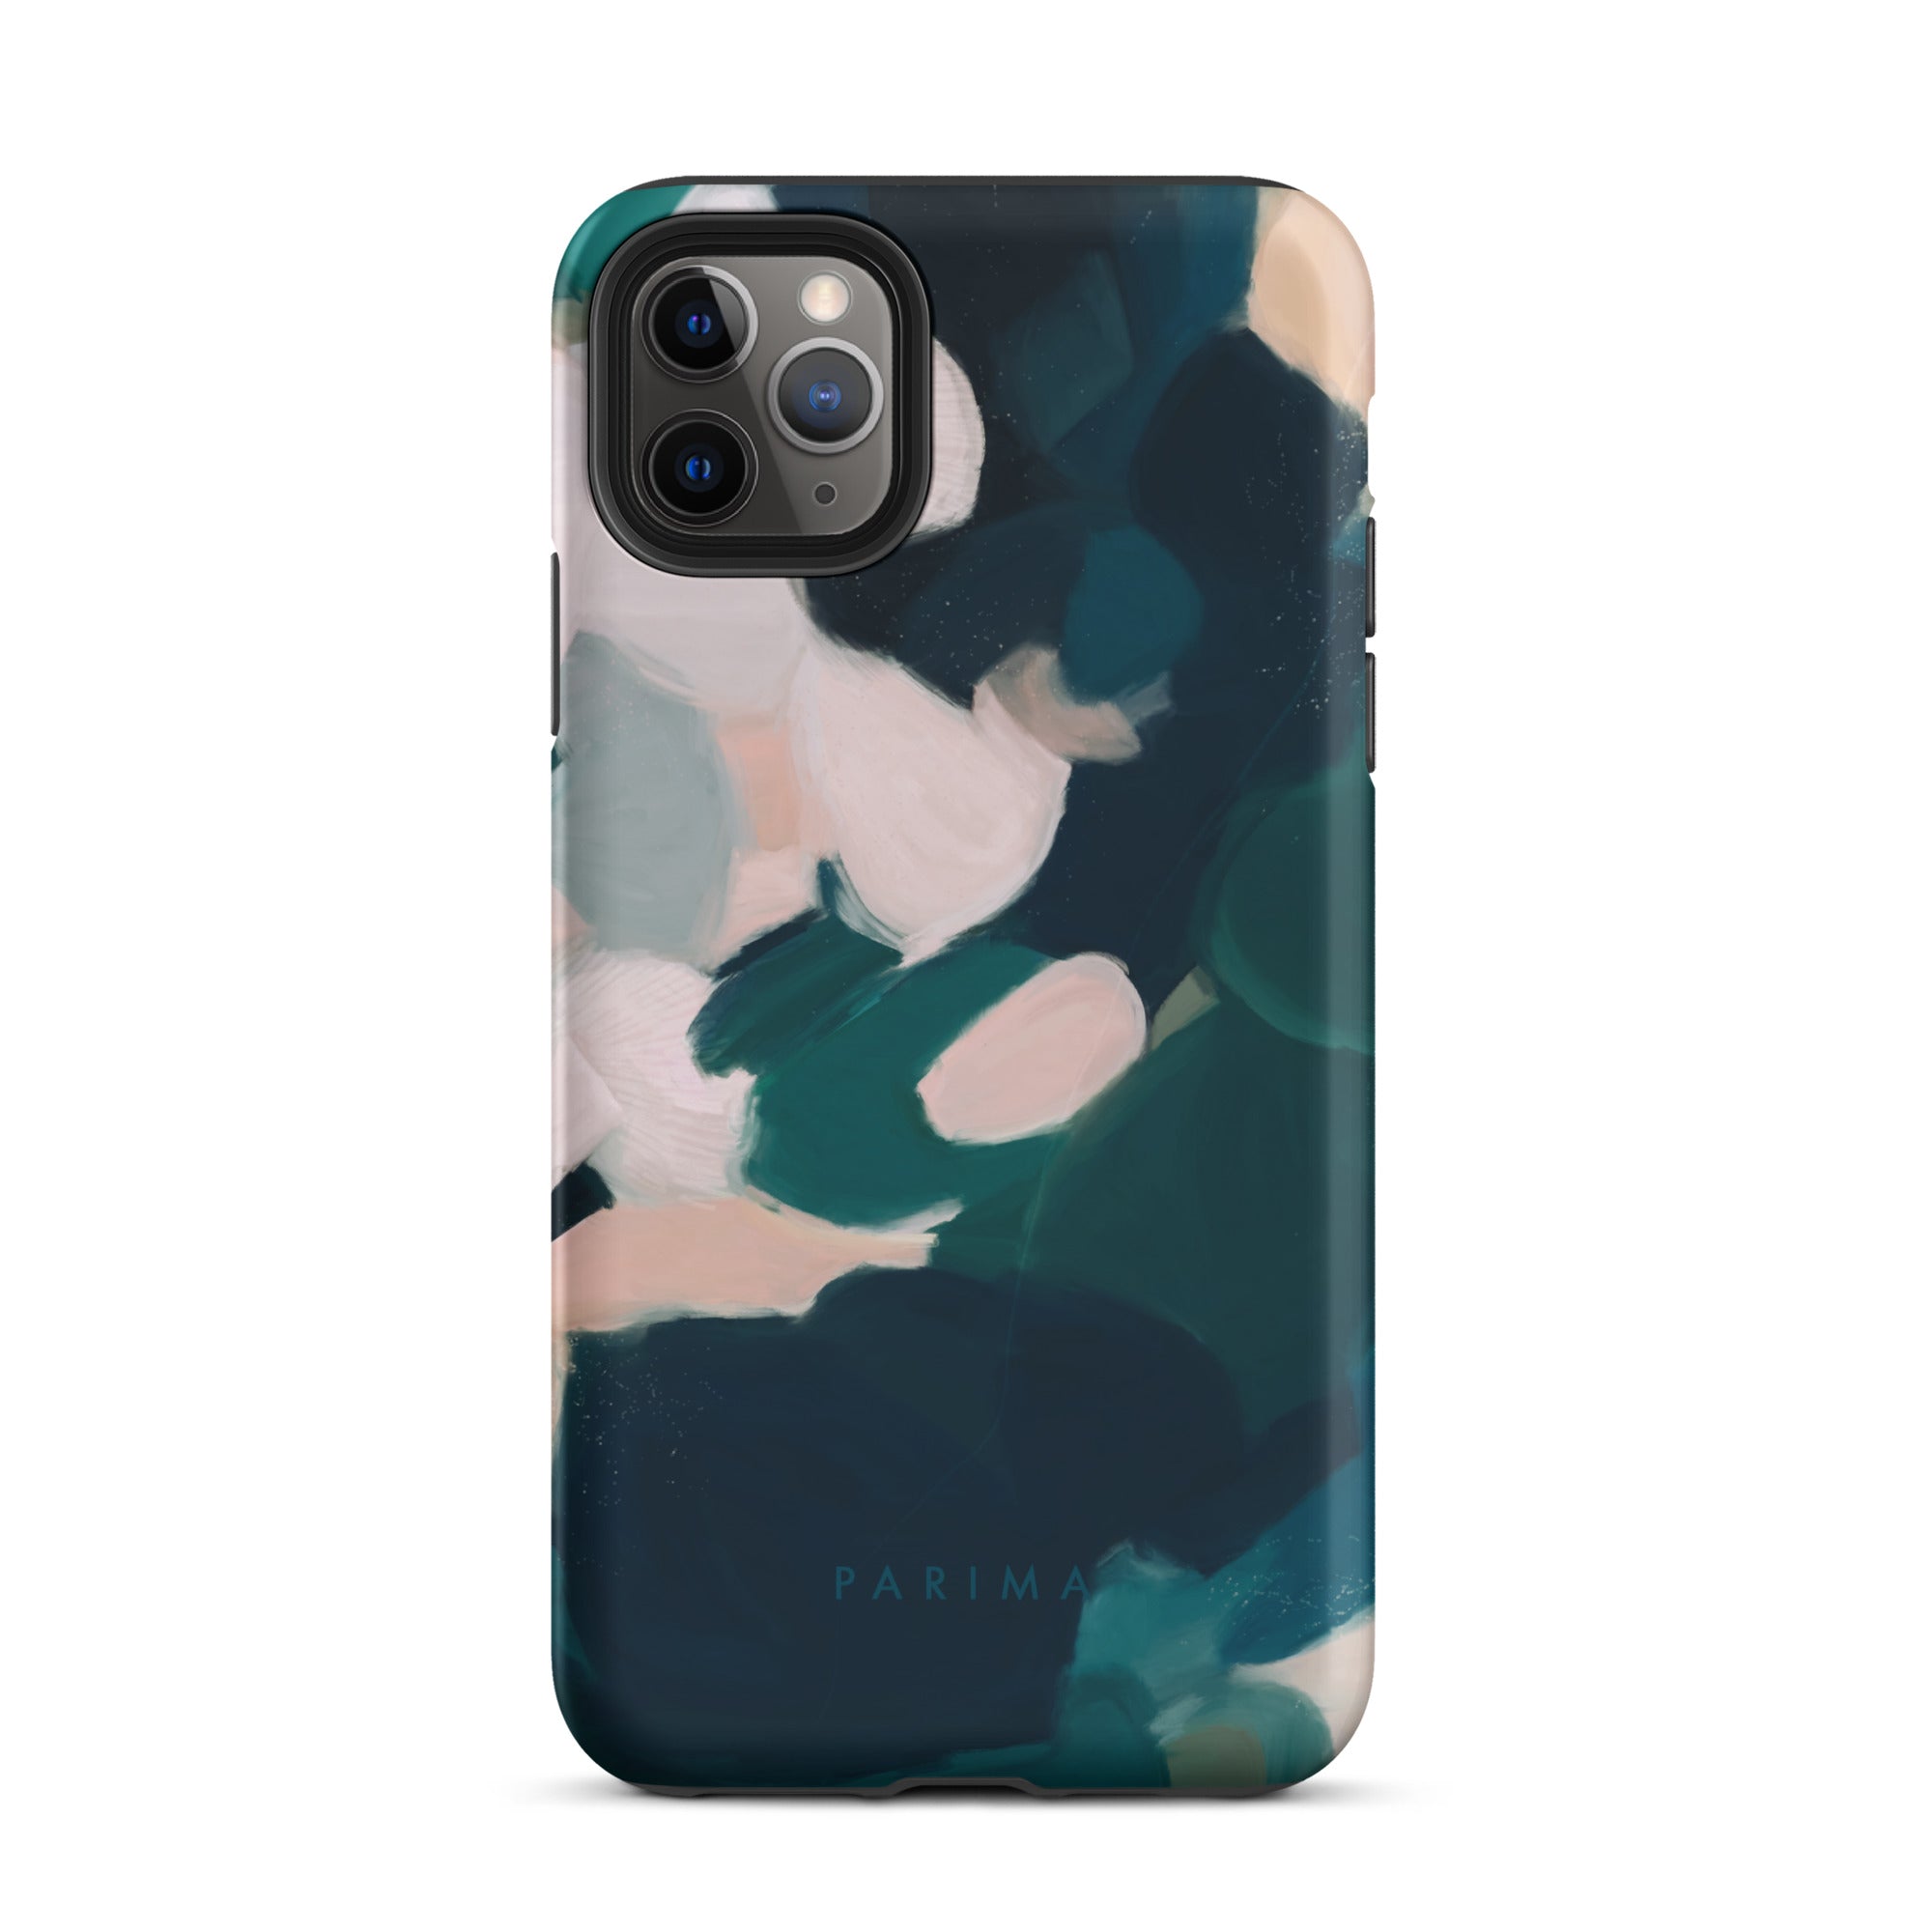 Aerwyn, green and pink abstract art - iPhone 11 Pro Max tough case by Parima Studio